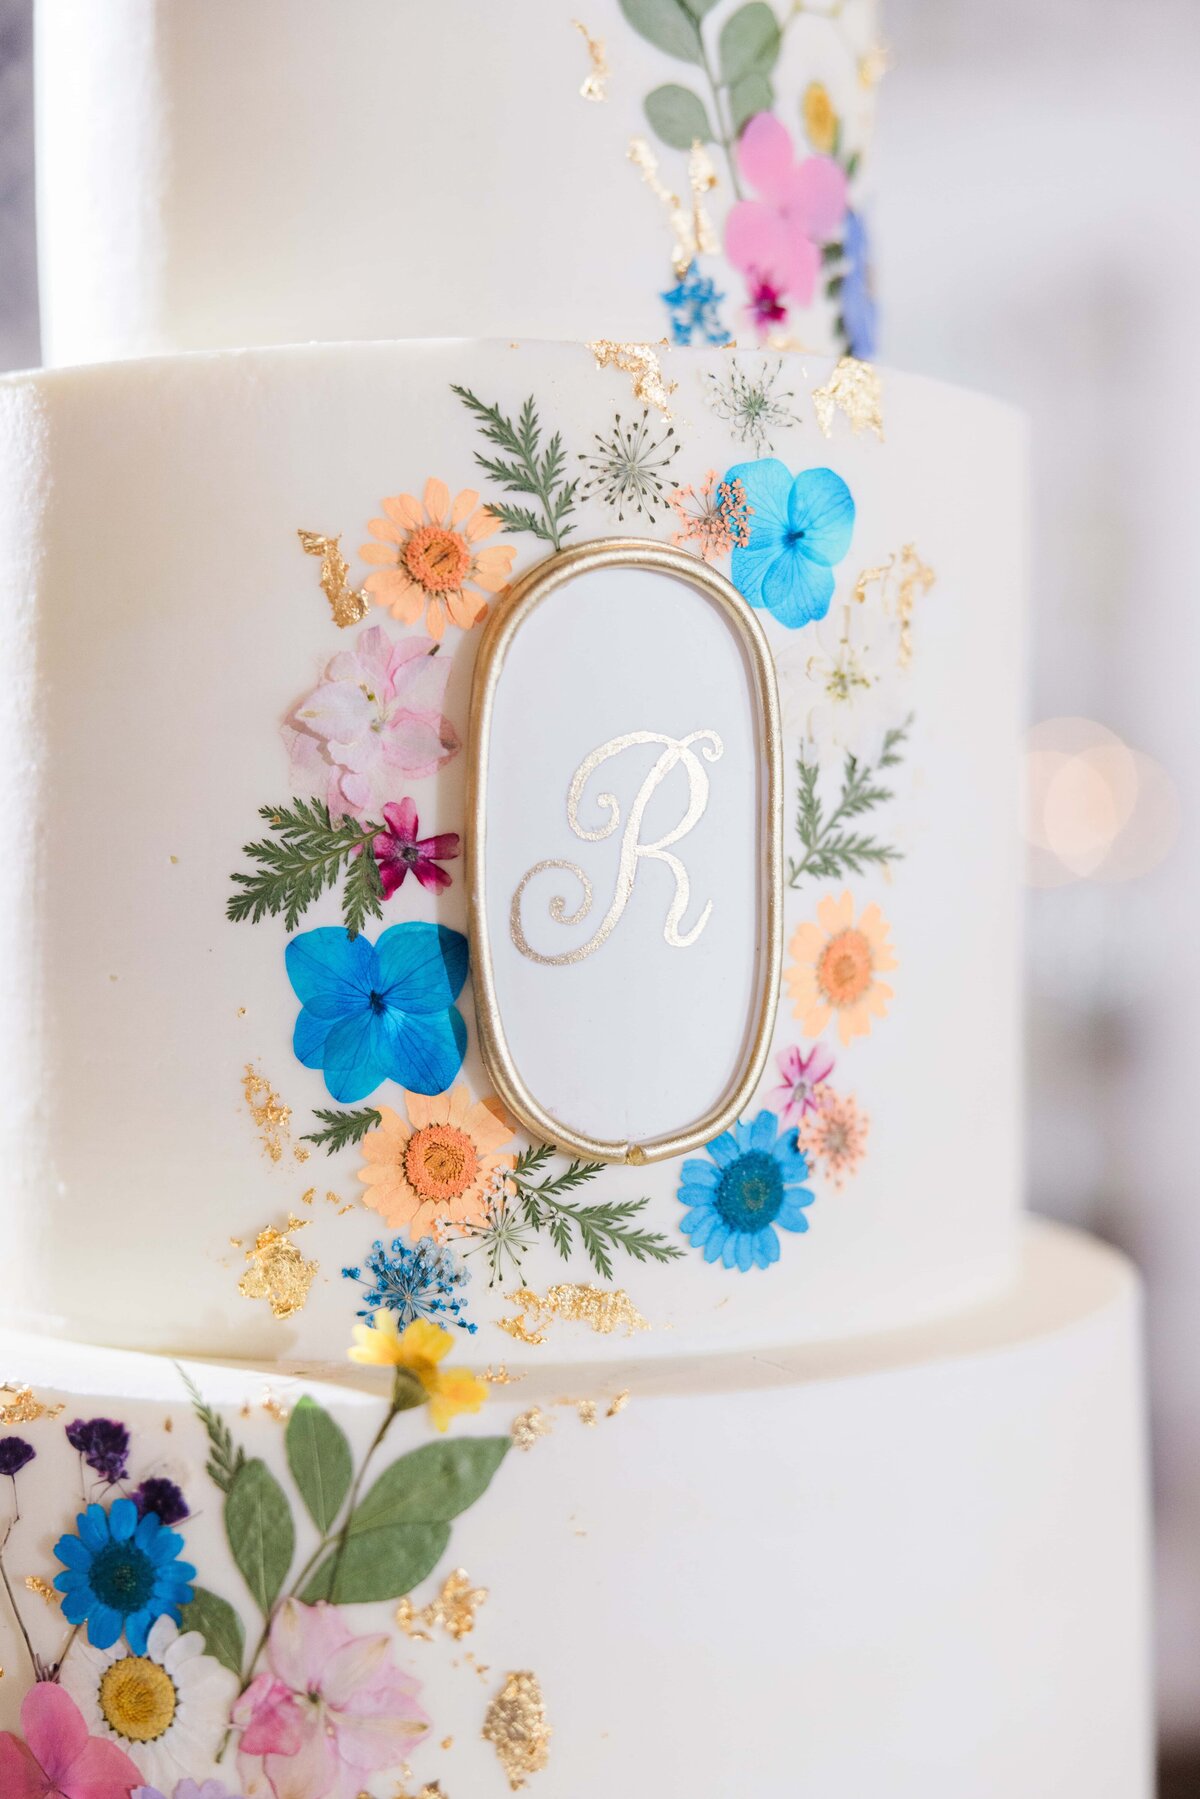 Close-up of a multi-tiered white wedding cake adorned with colorful edible flowers and a gold-framed oval plaque with "Park Farm Winery" on the middle tier.